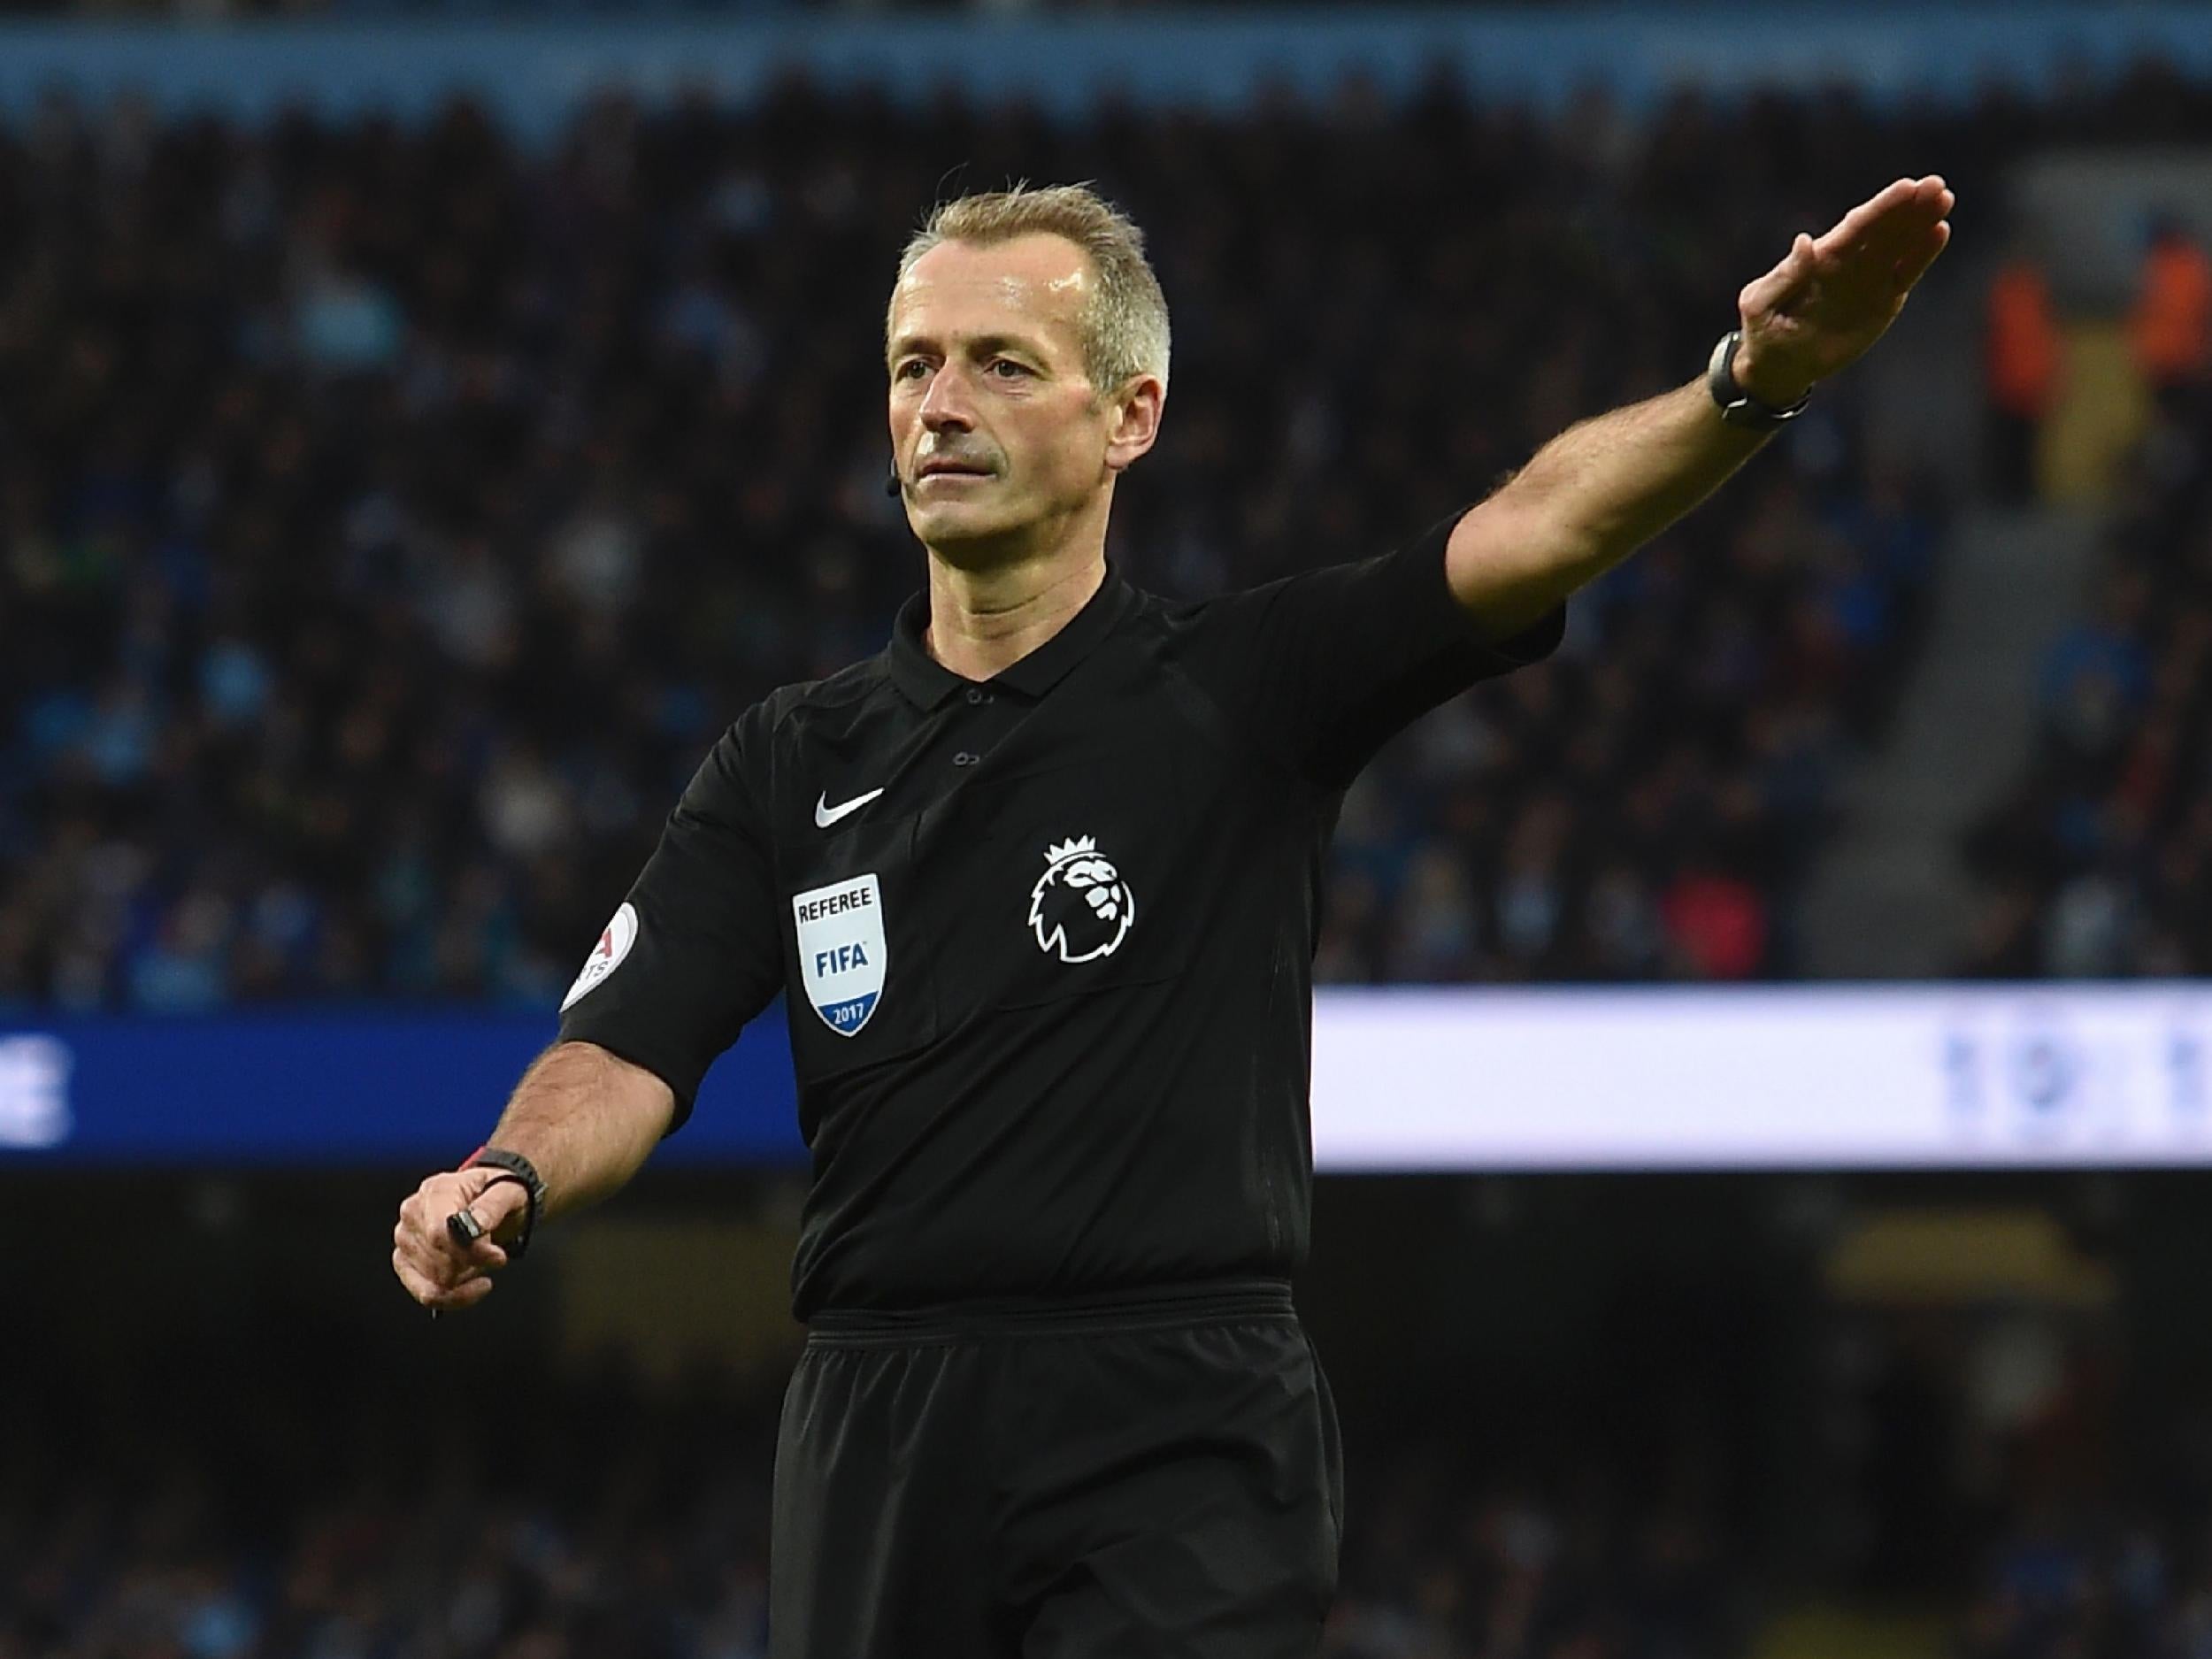 Referee Martin Atkinson let a number of fouls go during the game